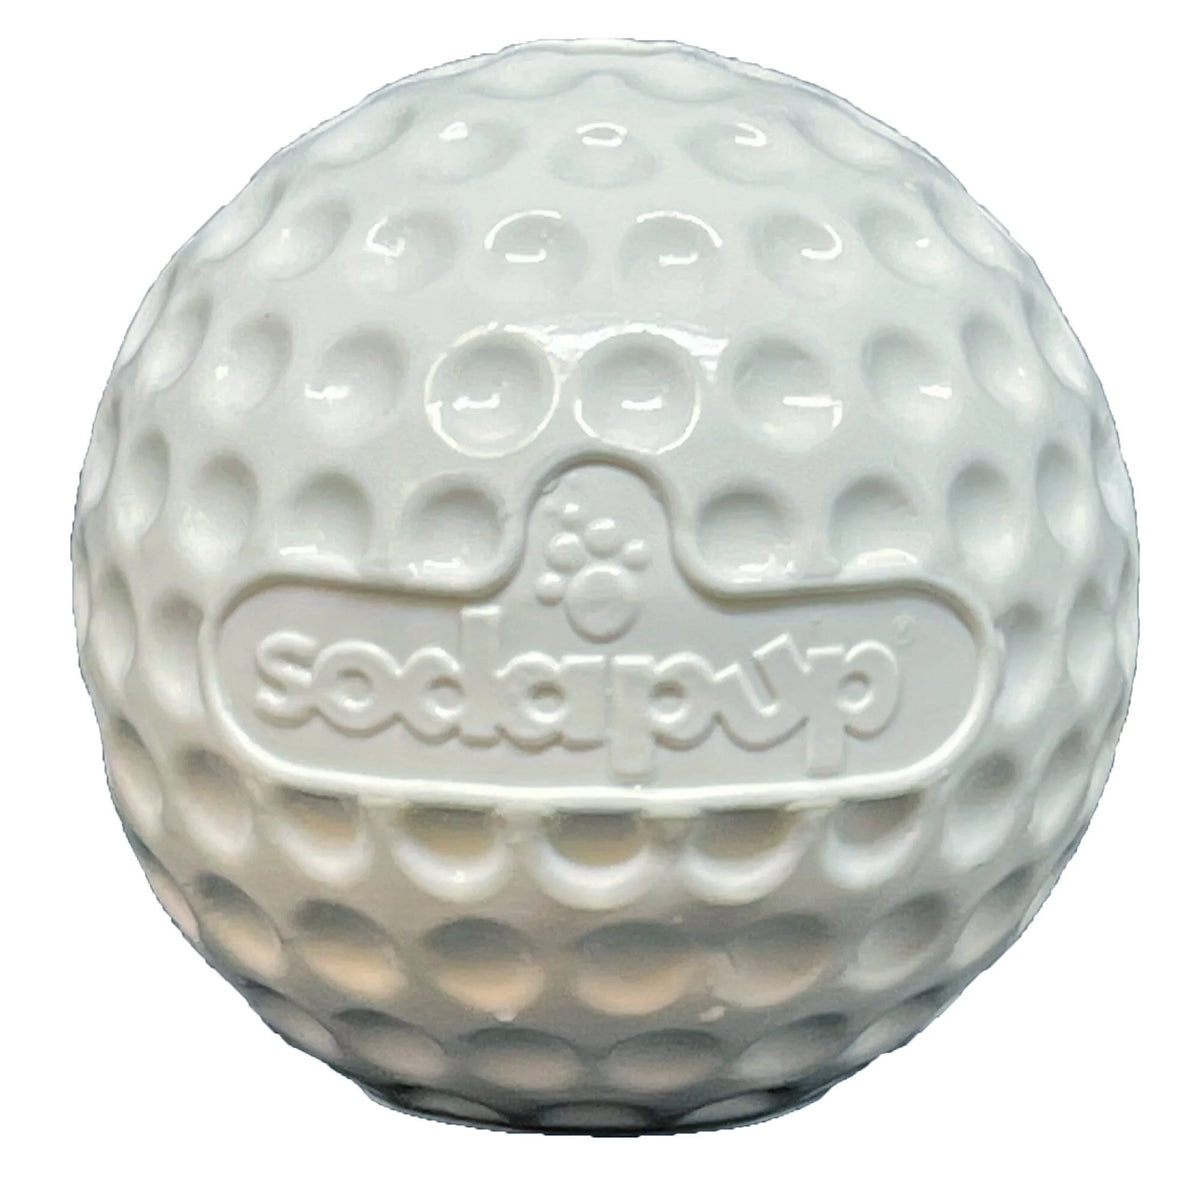 Golf Ball Treat Dispenser and Dog Toy